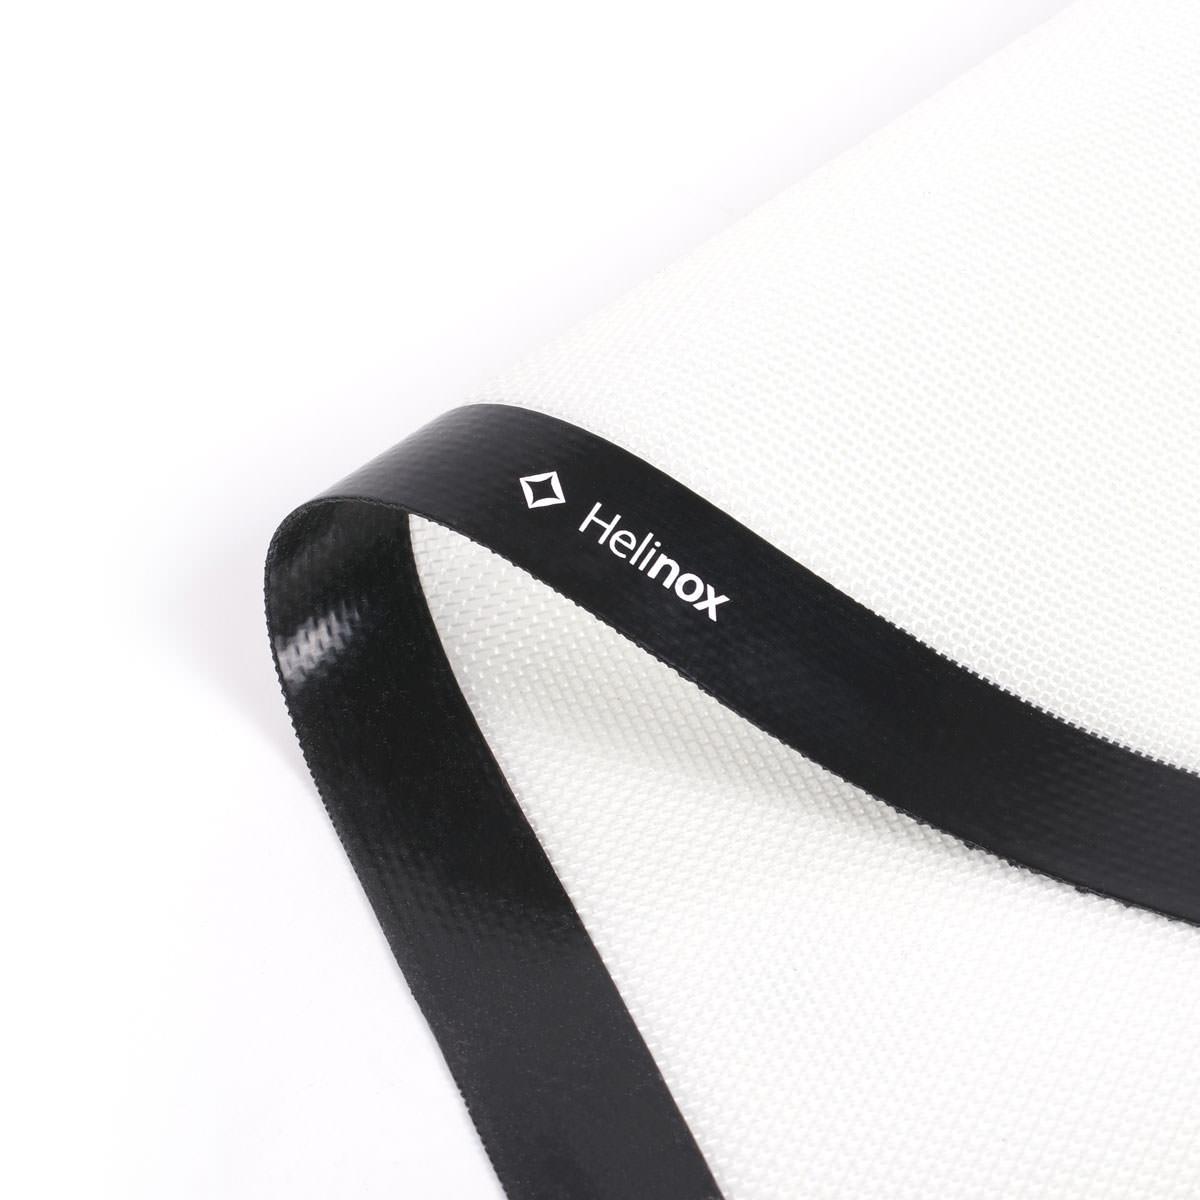 Helinox Silicone Mat for Table